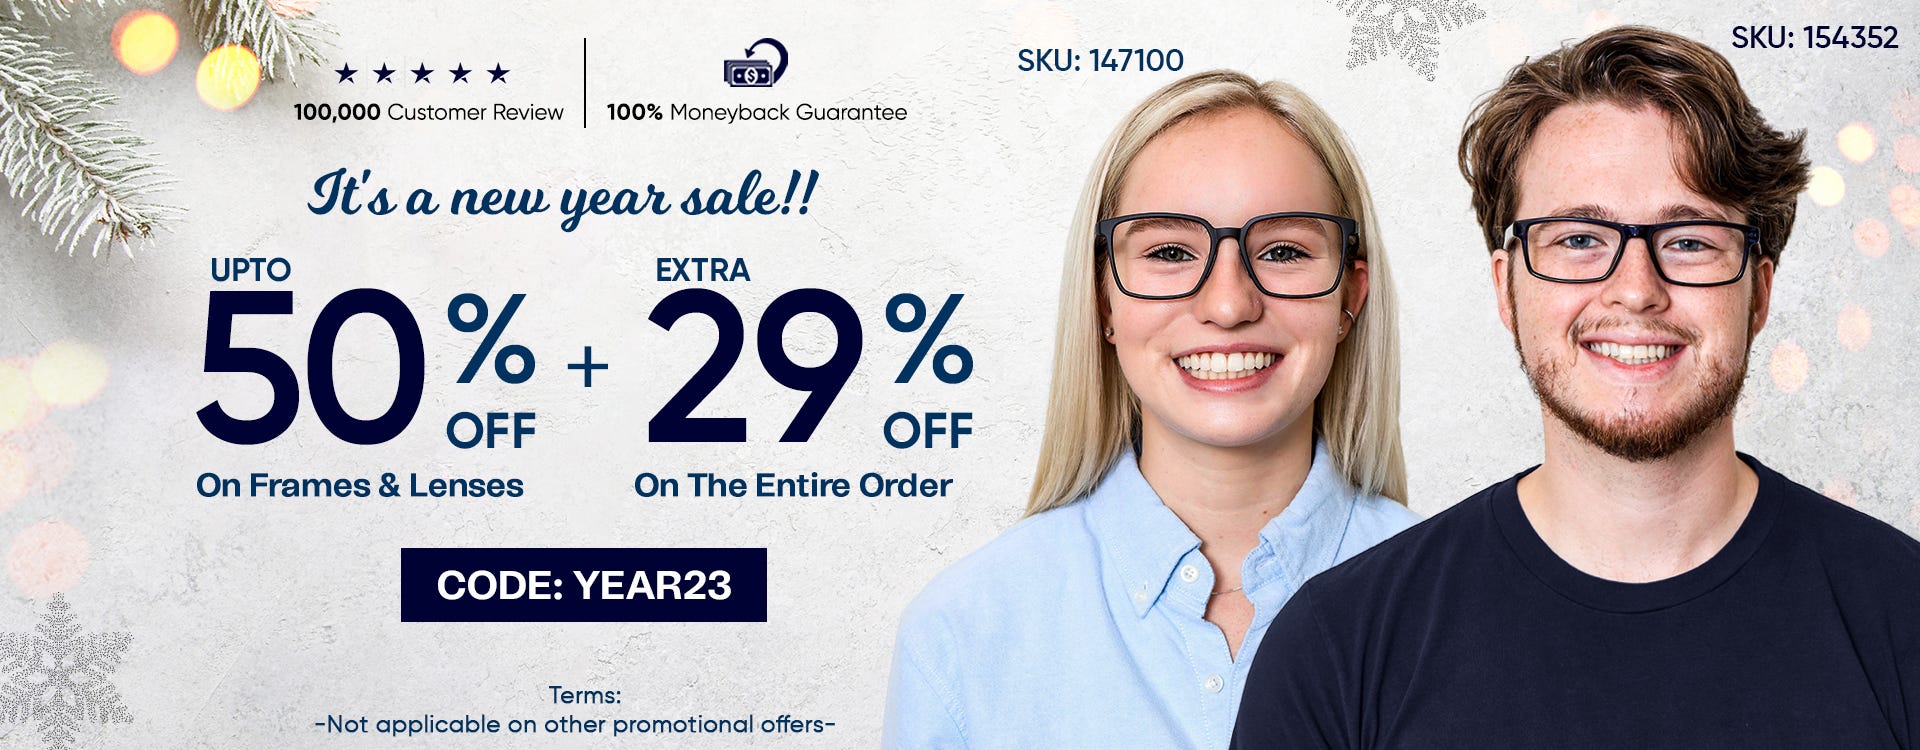 UPTO 50% Discount On All Frames & Lenses + 29% OFF On The Entire Order CODE: NEWYEAR23